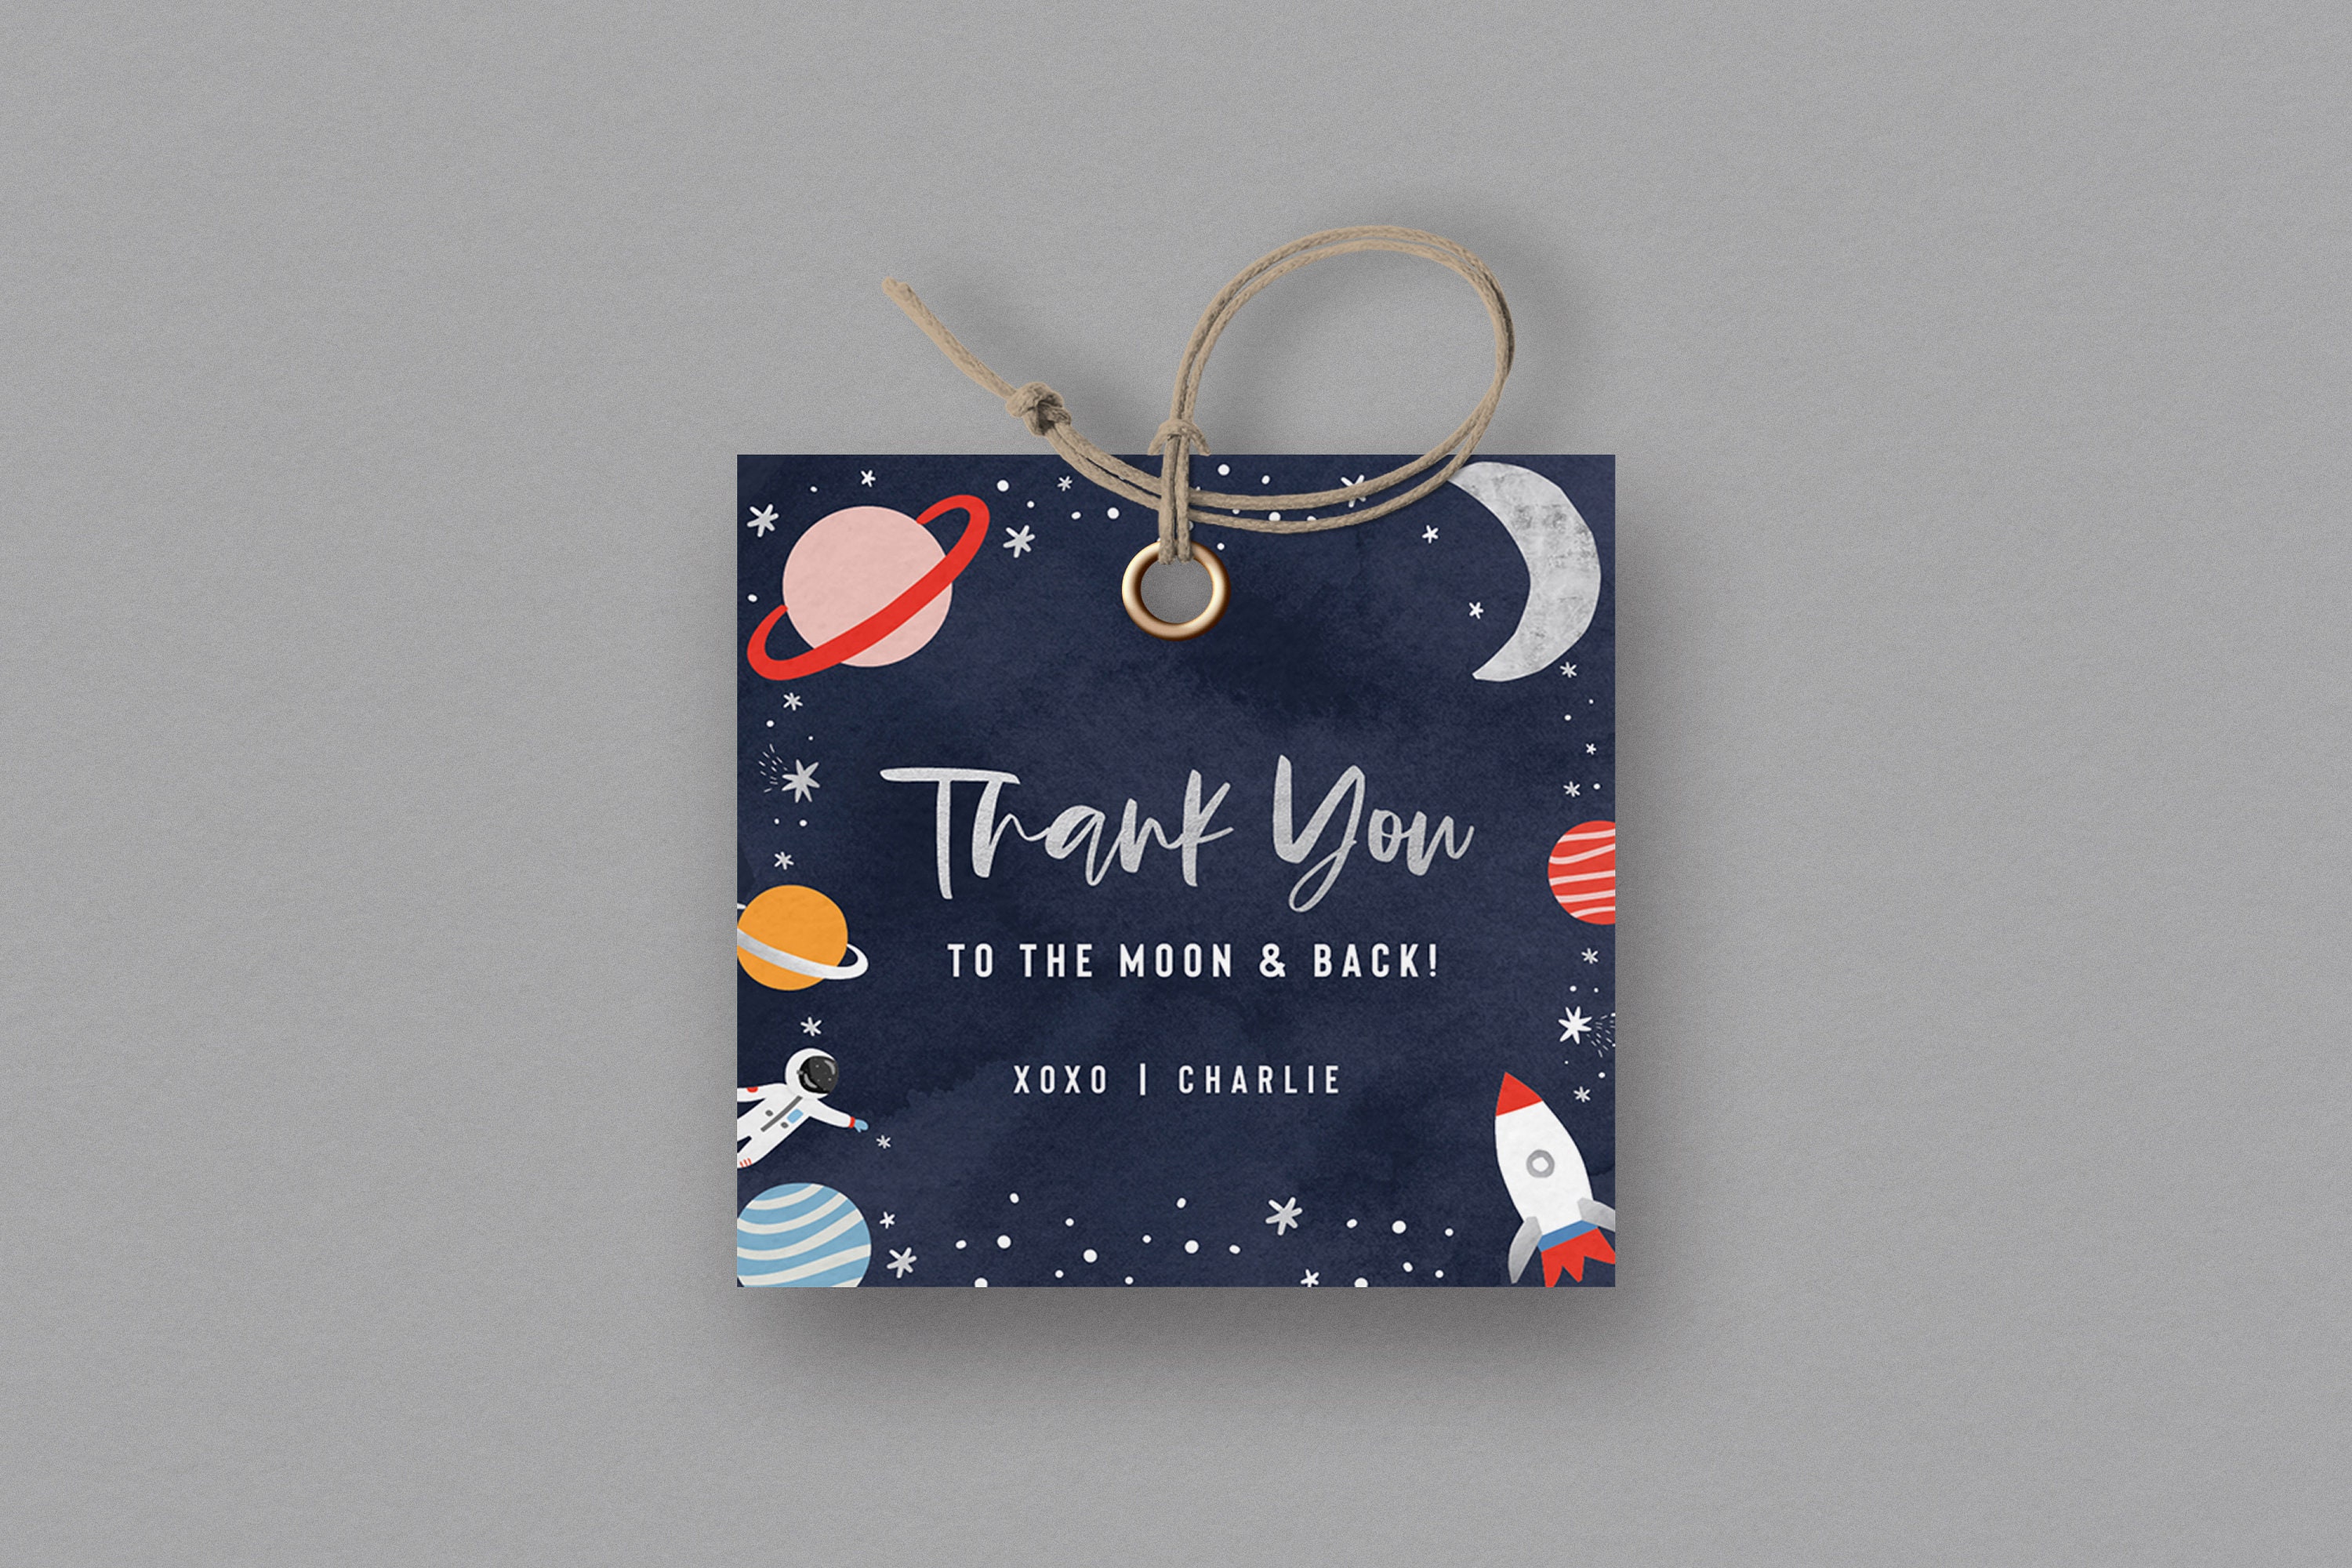 Editable Moon Thank You Favor Tag Baby Shower Gift Love You to the Moo -  Design My Party Studio